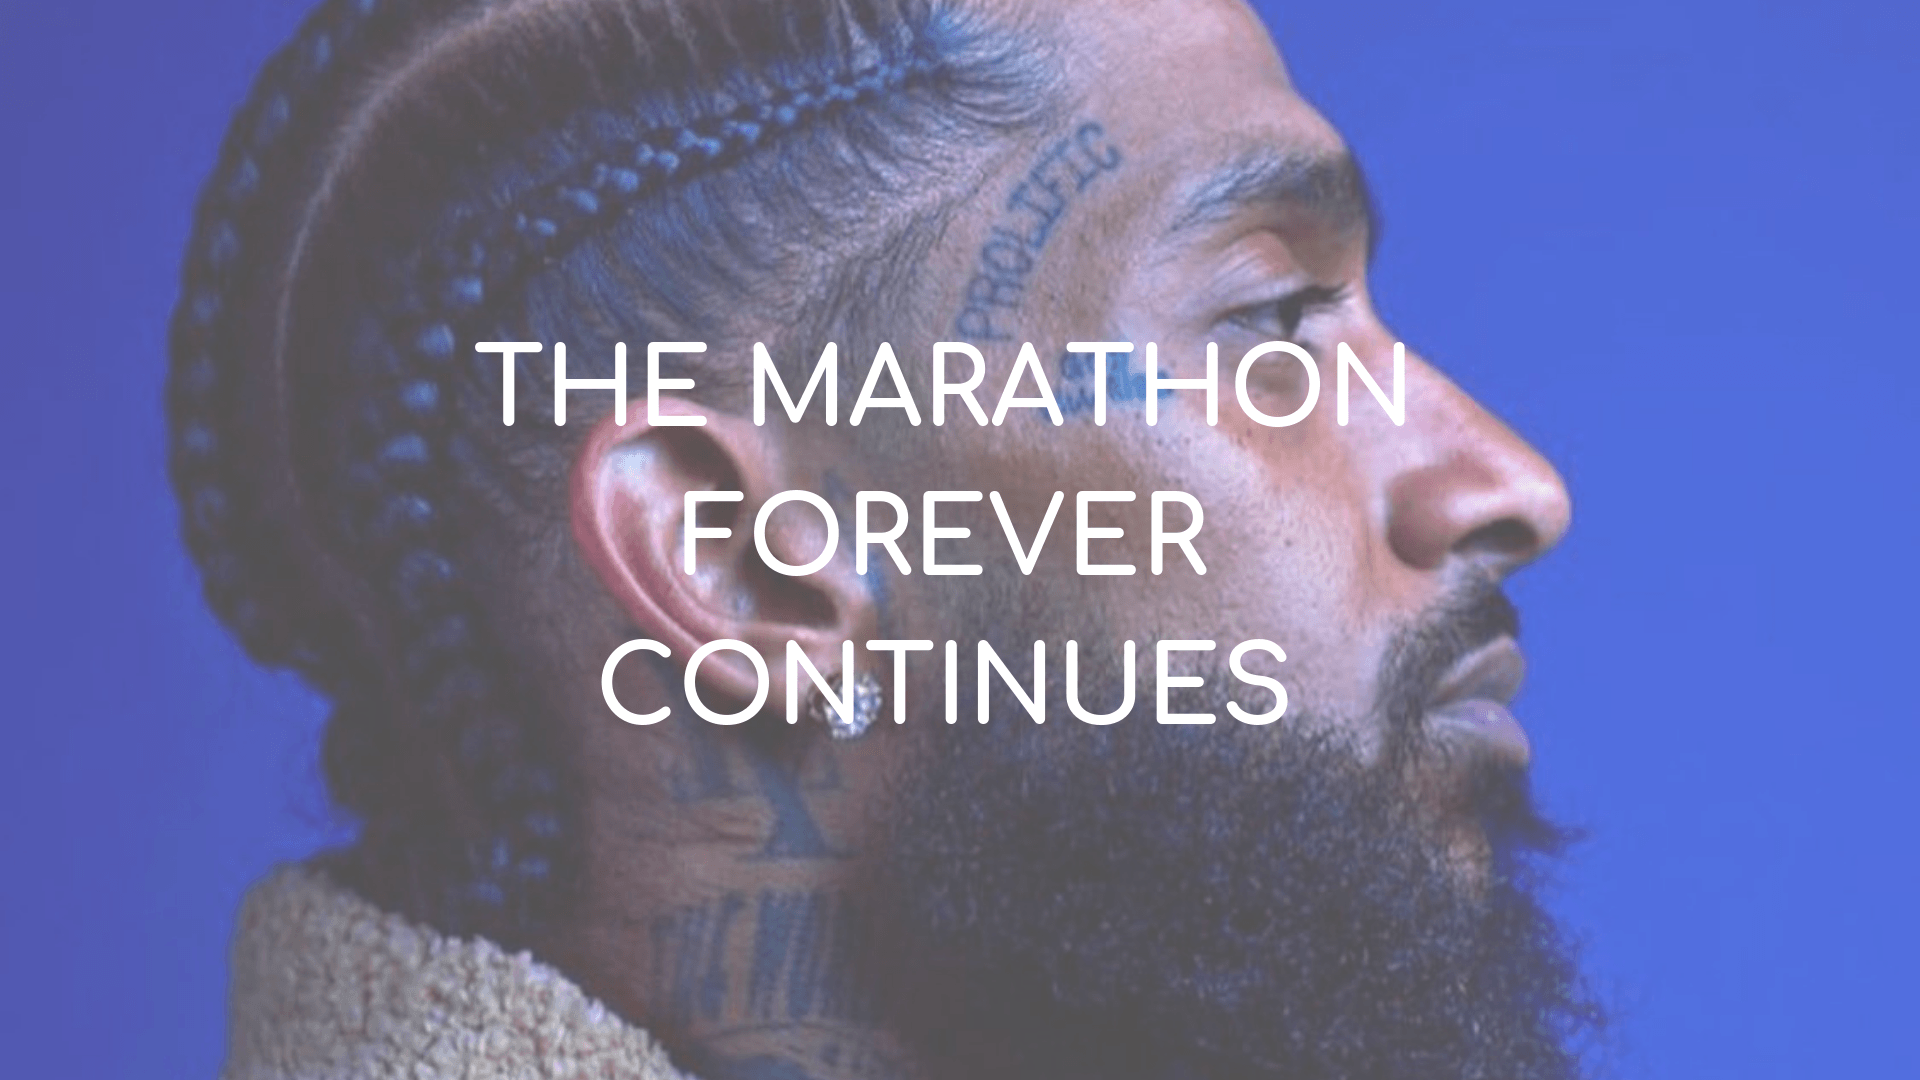 Remembering Nipsey Hussle: The Marathon Forever Continues